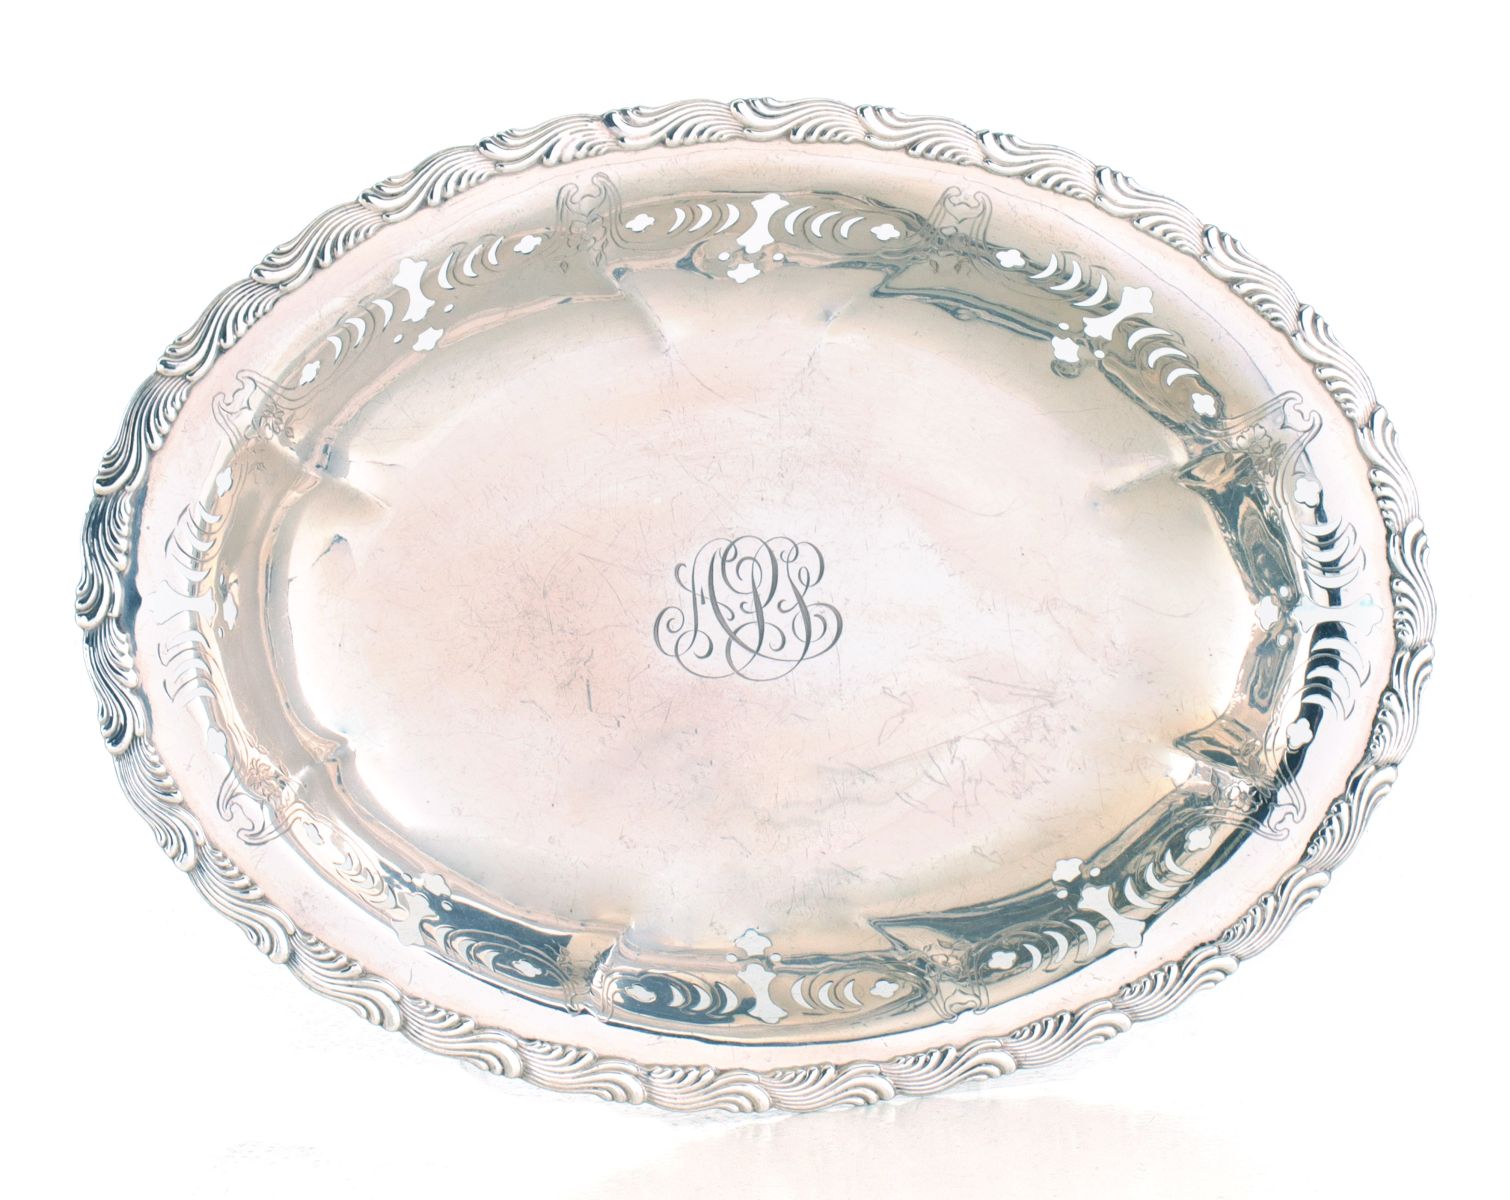 A TIFFANY AND CO WAVE EDGE PATTERN BREAD BASKET